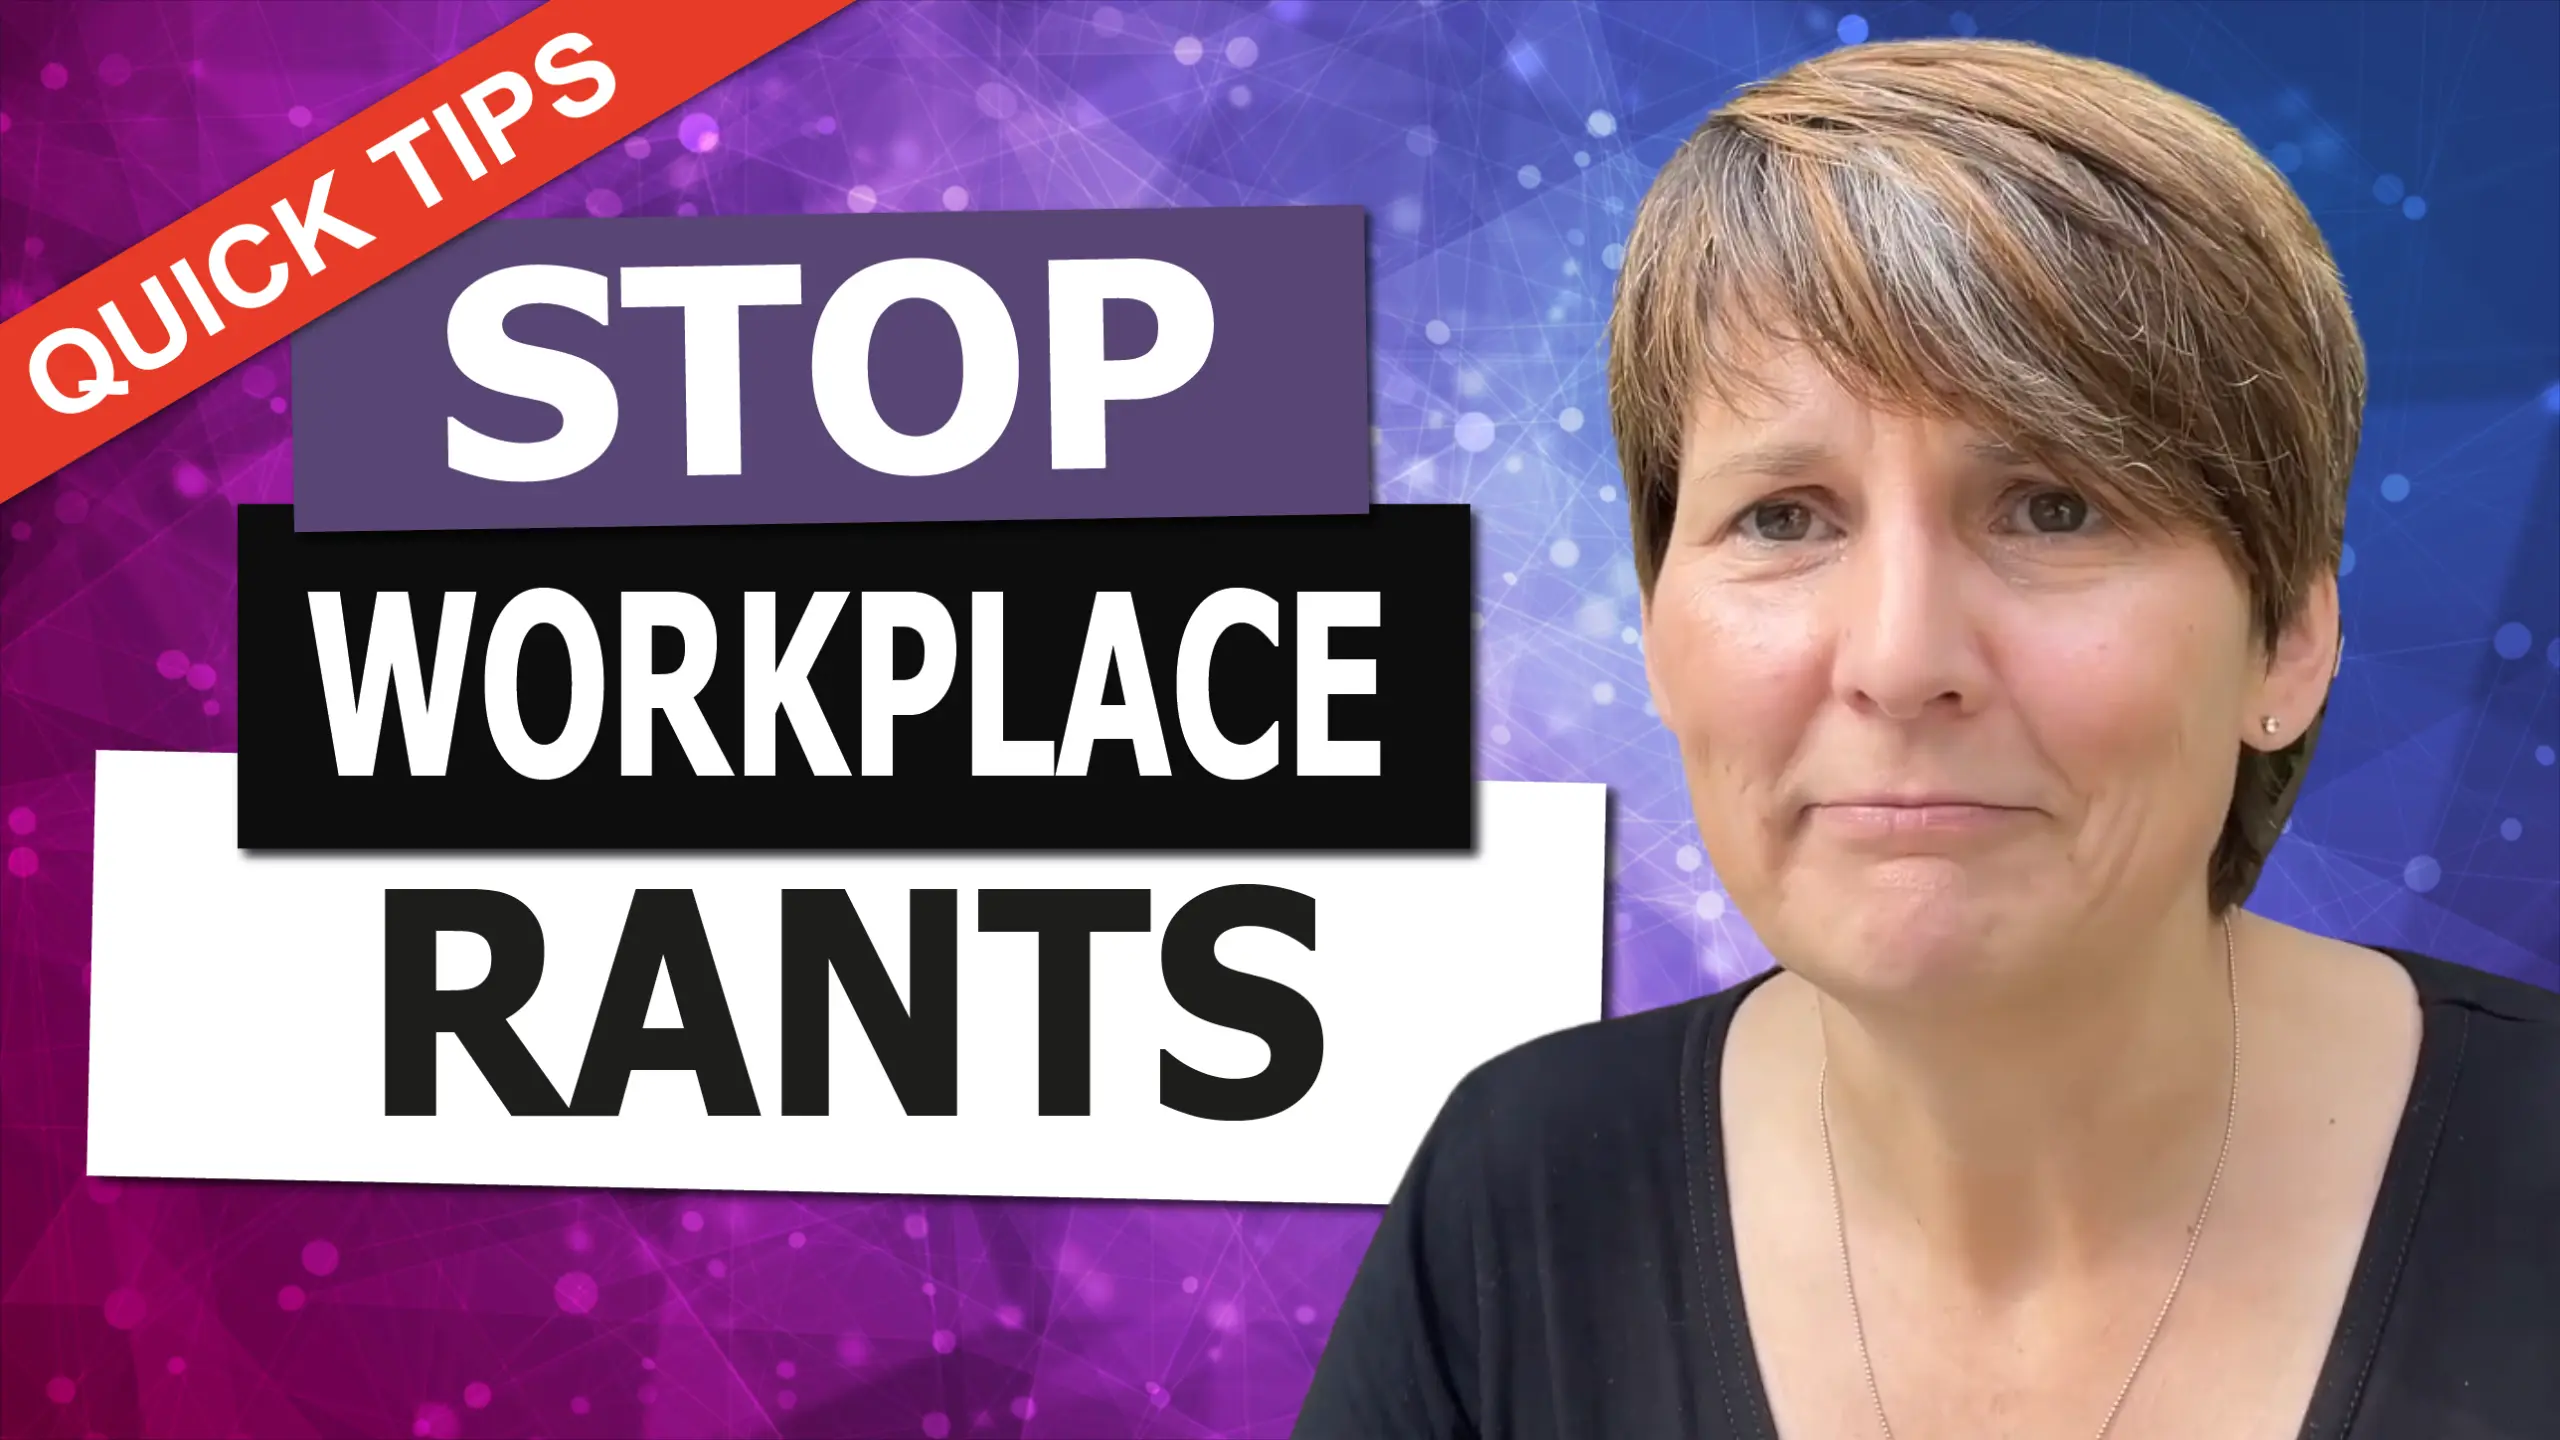 Stop Workplace Rants with Liane Davey